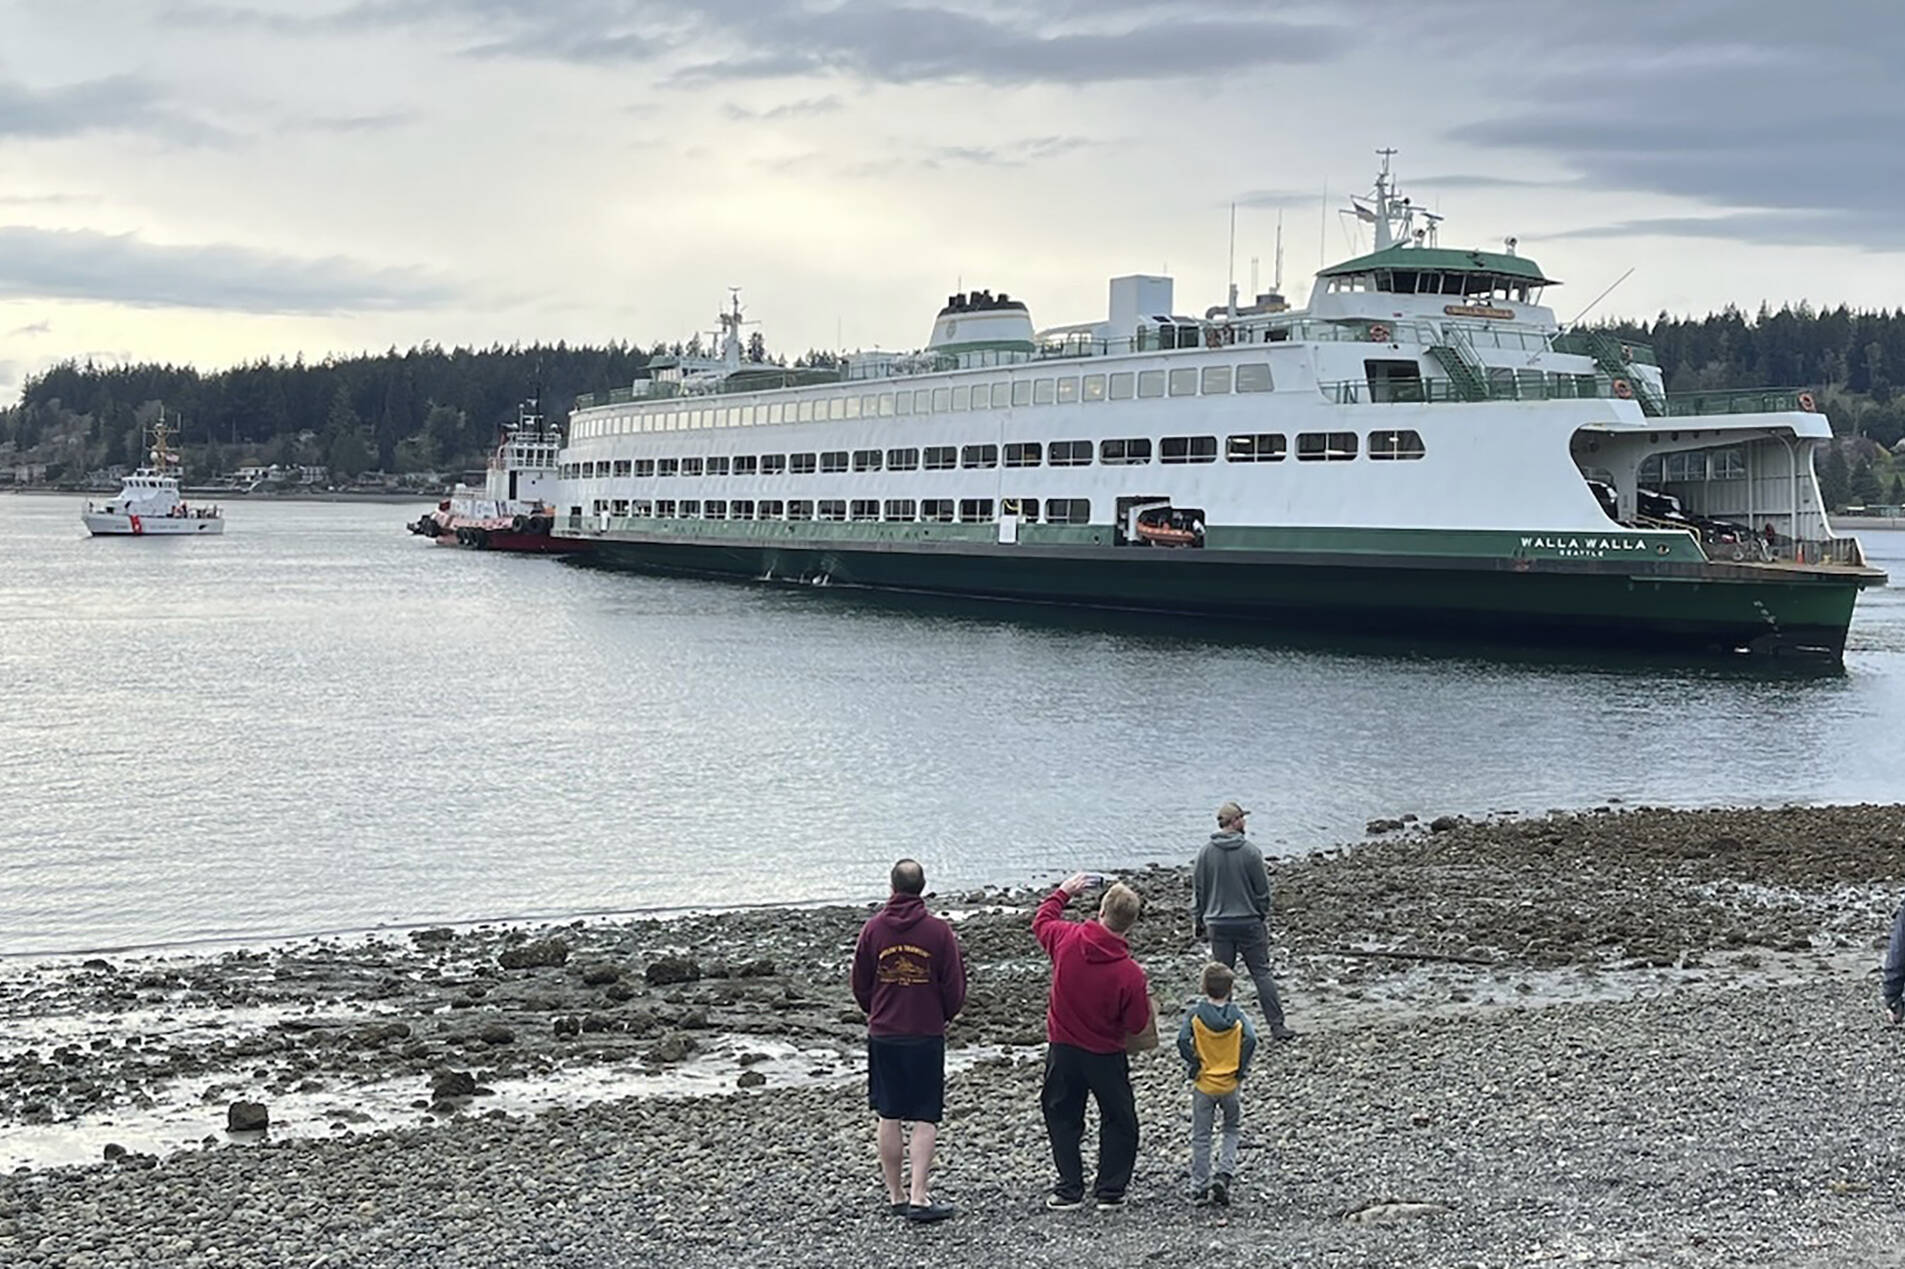 In this photo posted to the Washington state Department of Ecology website and taken by the U.S. Coast Guard, people watch as emergency crews respond to the Walla Walla passenger ferry, which ran aground near Bainbridge Island west of Seattle, Saturday, April 15, 2023. (Lt. Cmdr. Brian Dykens/U.S. Coast Guard via AP)